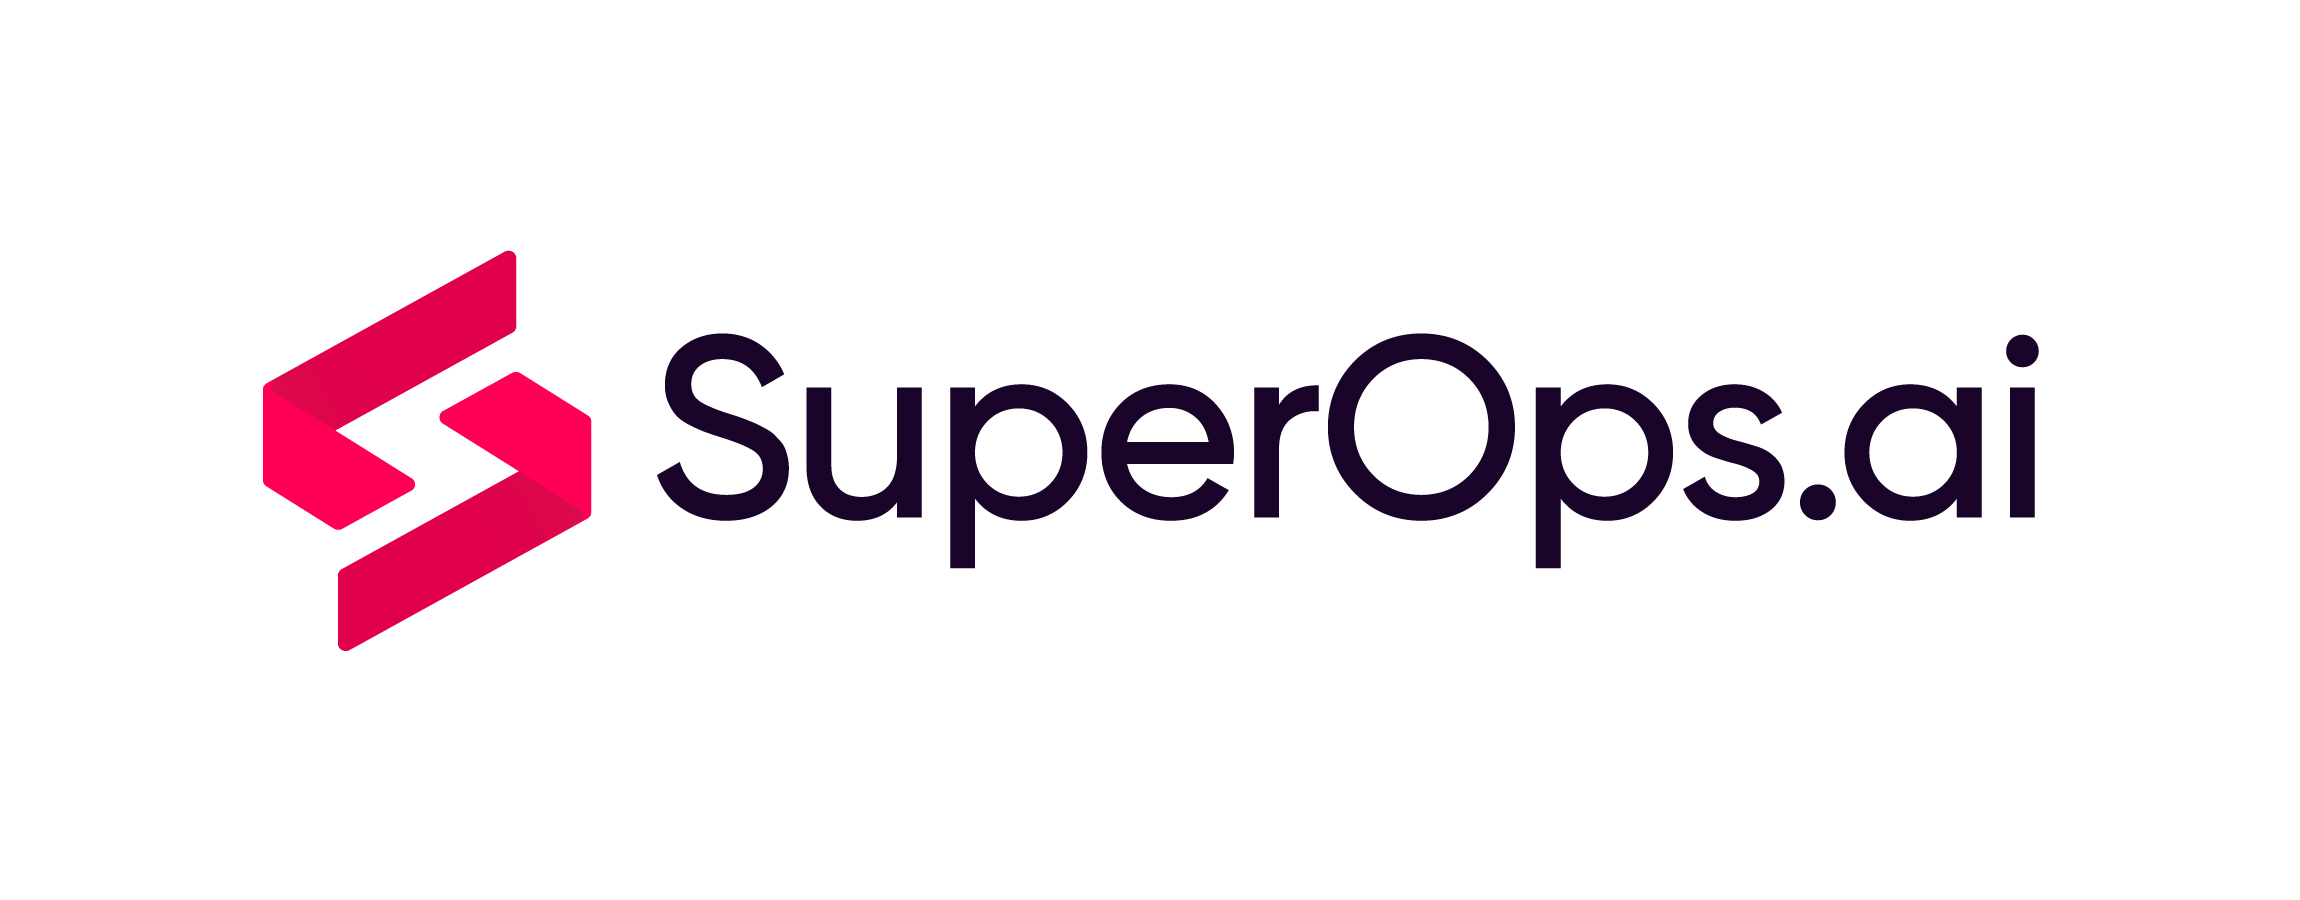 SuperOps.ai Secures $12.4 Million in Funding with Matrix Partners India's Support